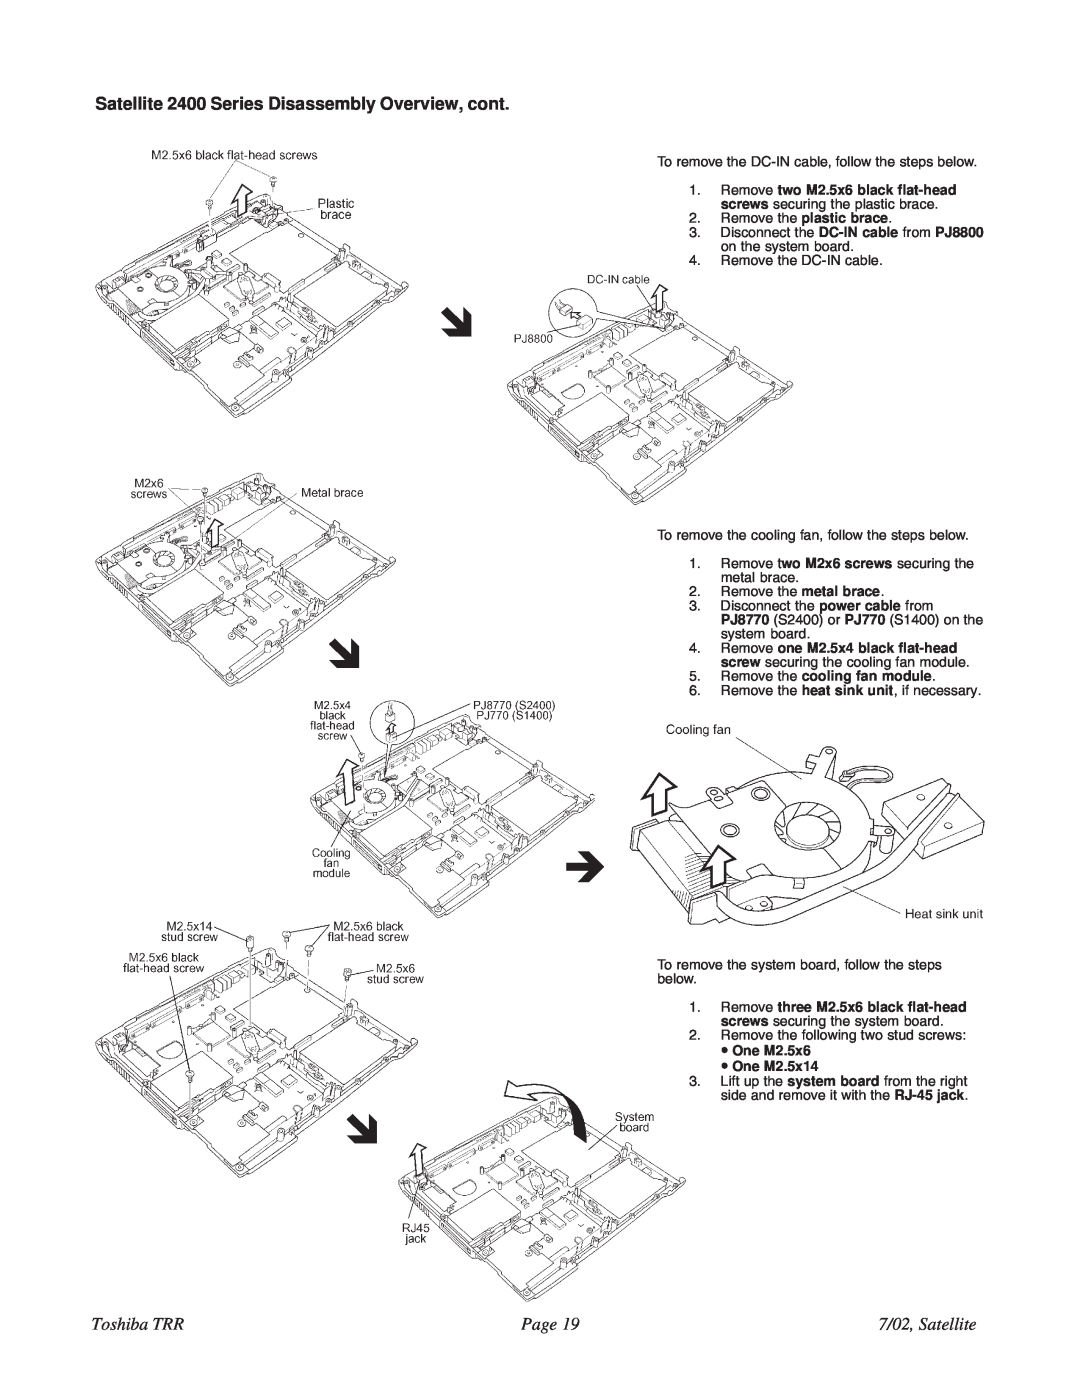 Toshiba 2405 Satellite 2400 Series Disassembly Overview, cont, Toshiba TRR, Page, 7/02, Satellite, One M2.5x6 One M2.5x14 